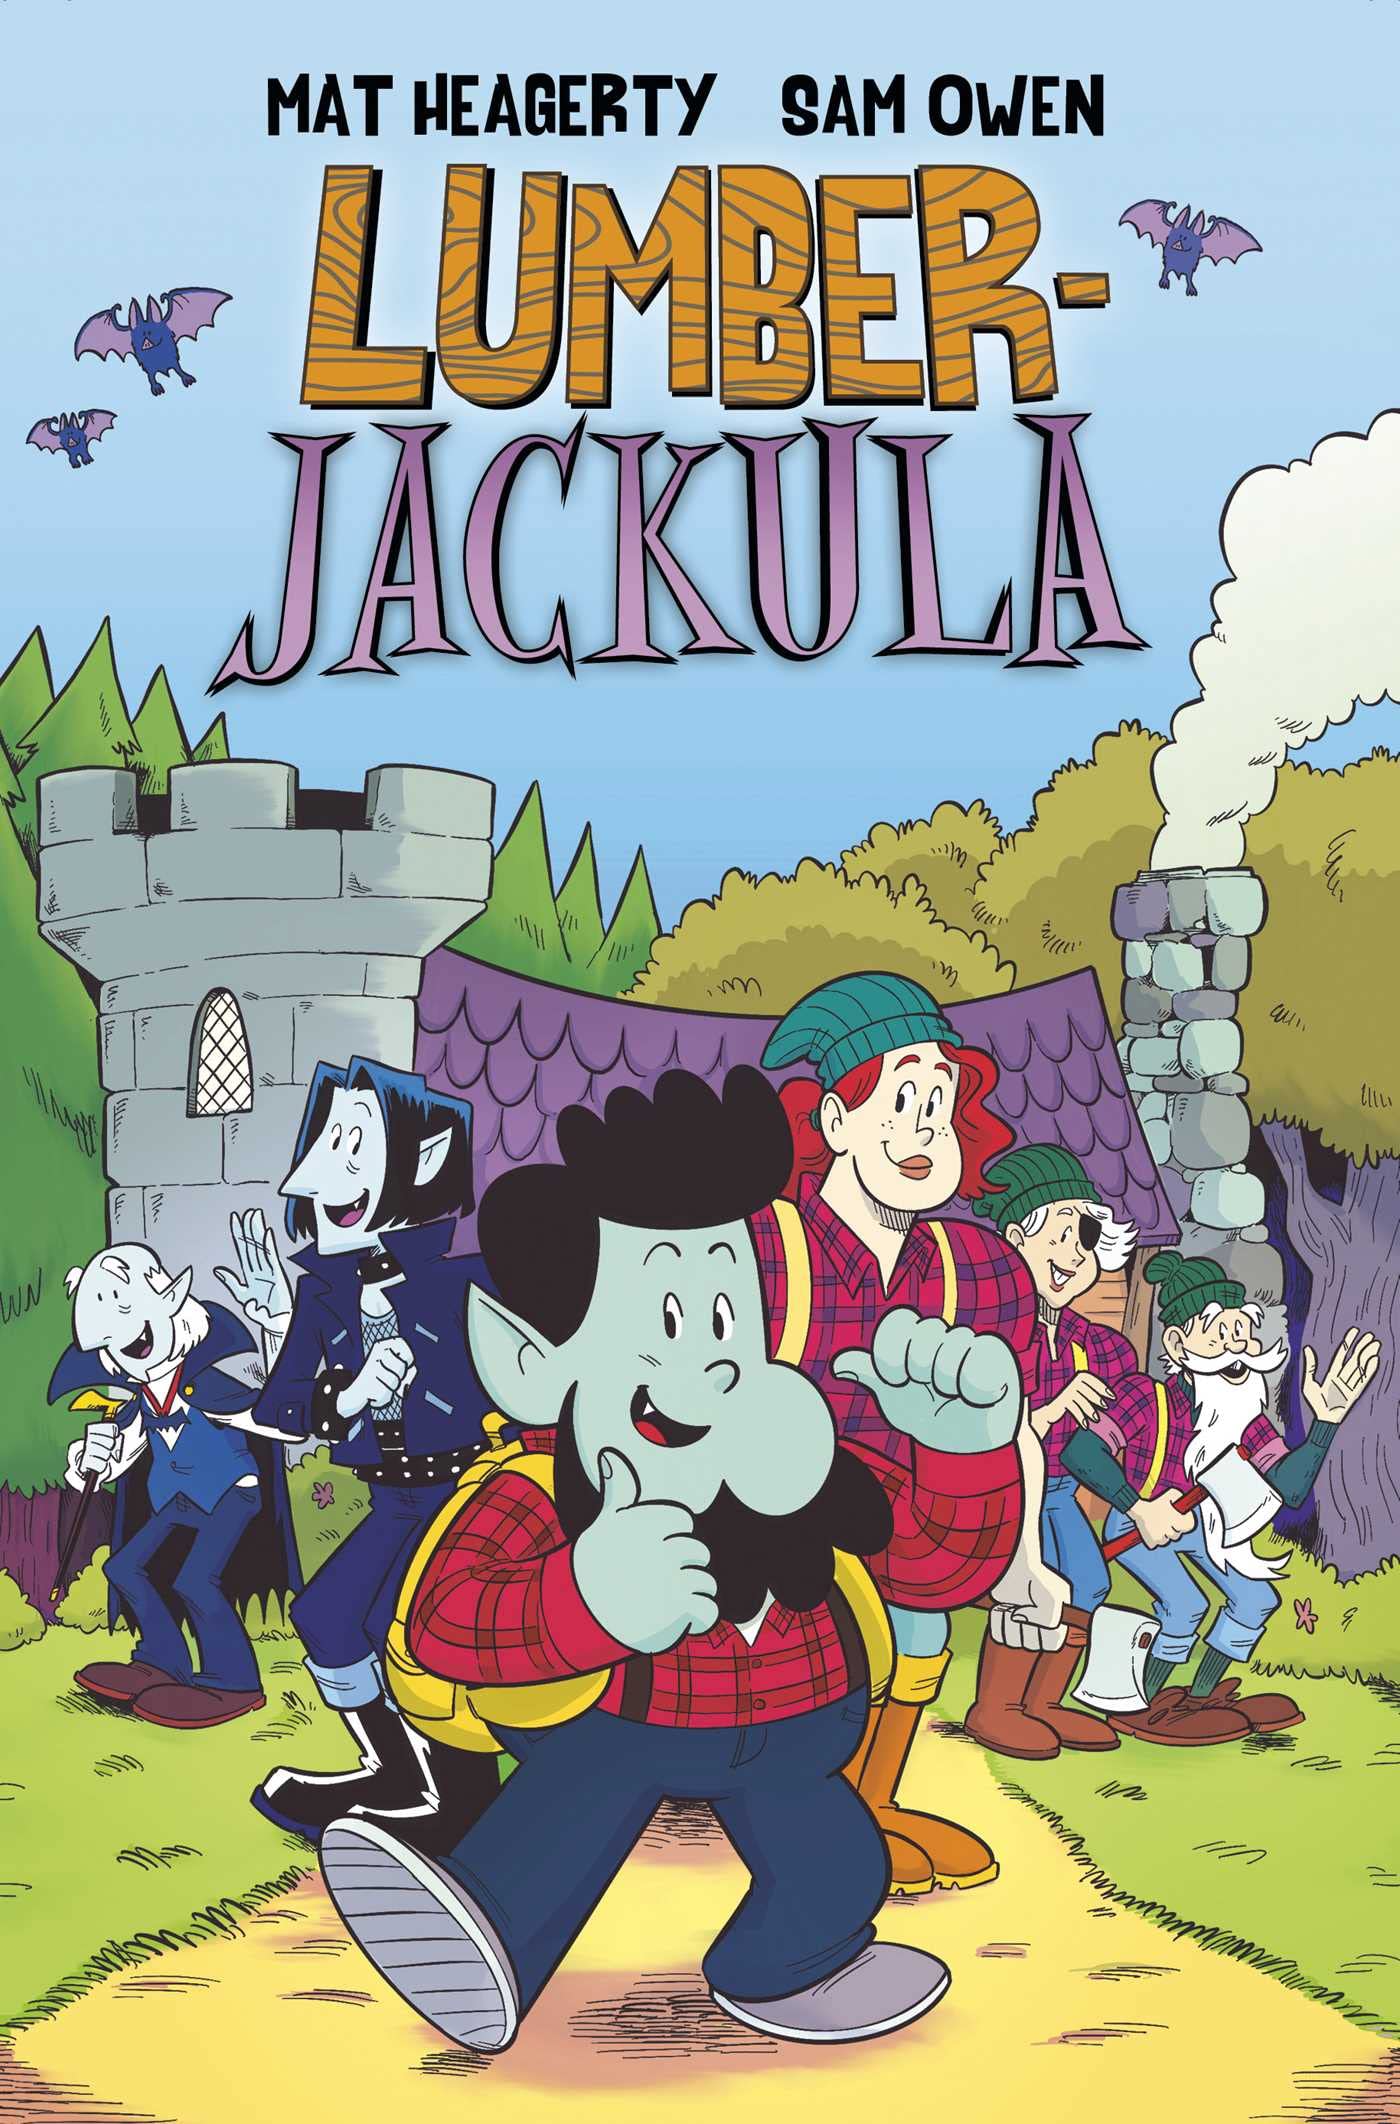 Cover of Lumberjackula, showing a green-skinned boy with pointy ears and a beard, wearing a red flannel shirt and suspenders, giving thumbs-up while surrounded by lumberjack and vampire relatives